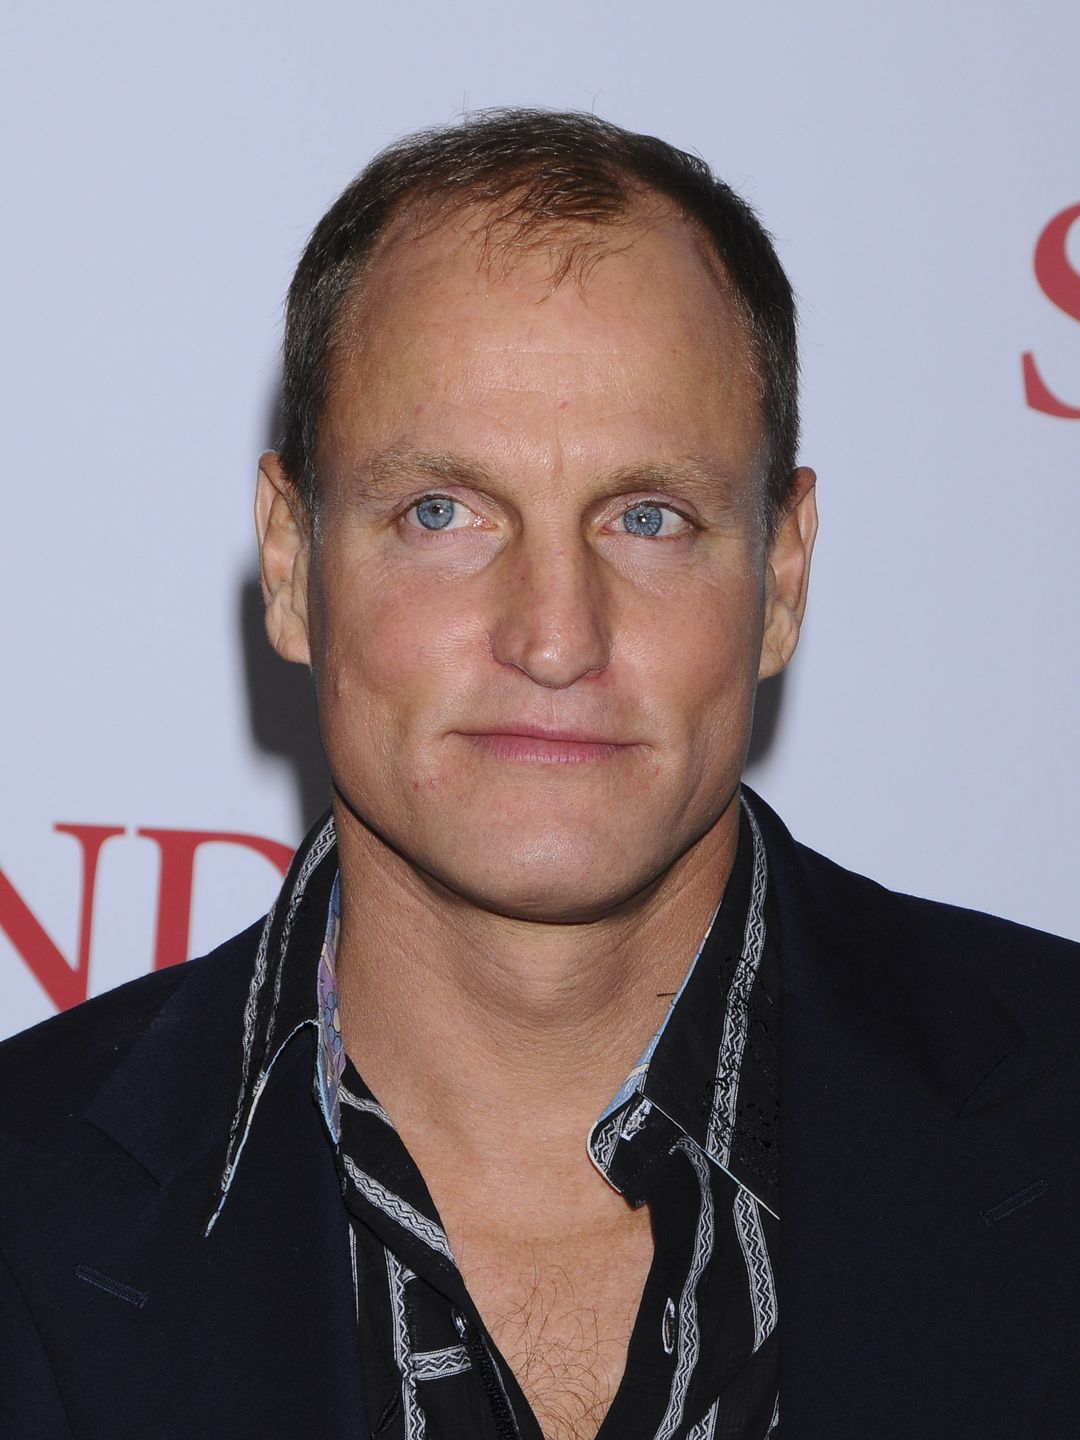 Woody Harrelson young photos